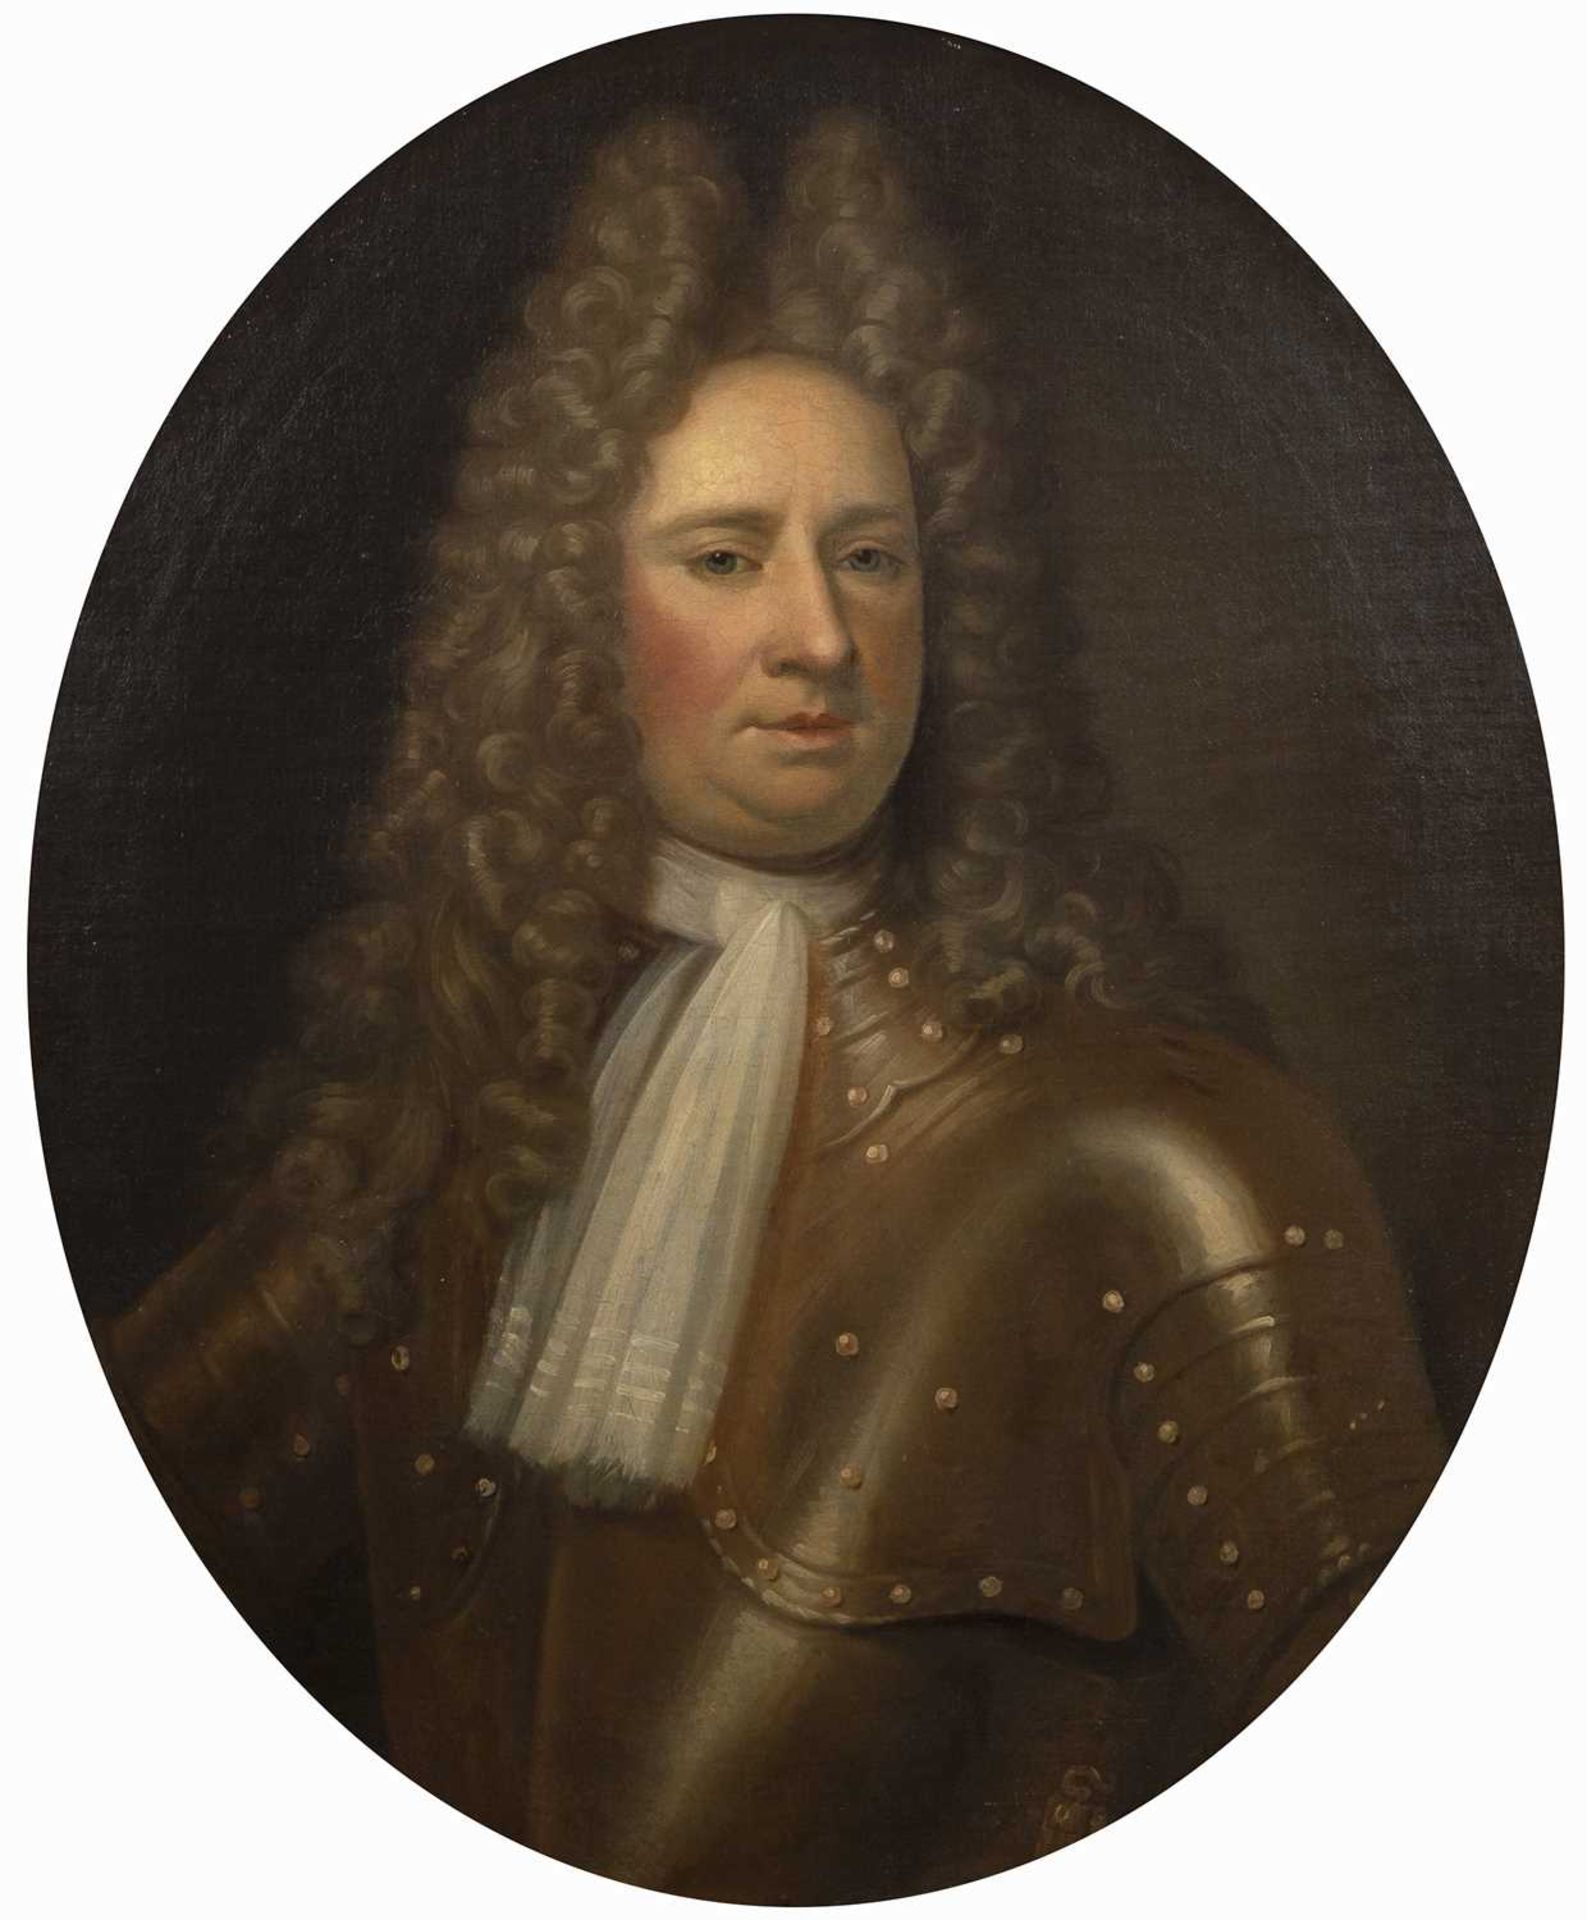 After Godfrey Kneller (1646-1723) Oval portrait of a nobleman wearing armour and a lace neckerchief,